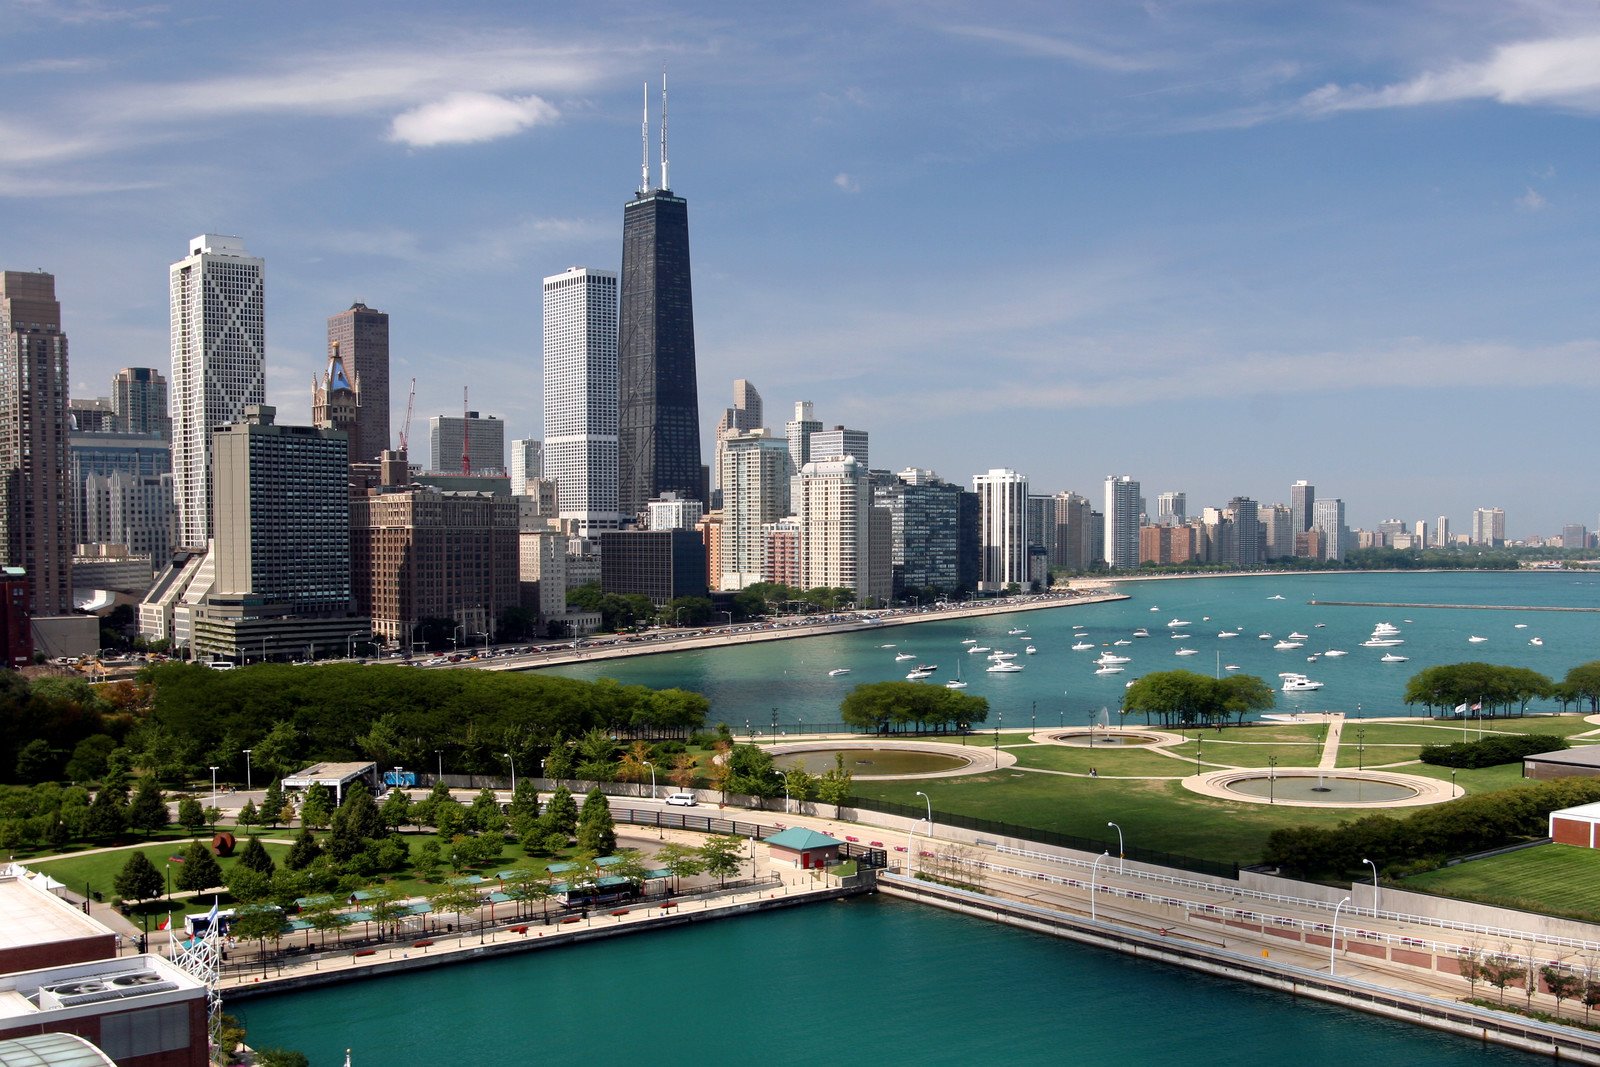 A Millennial’s Guide to Chicago